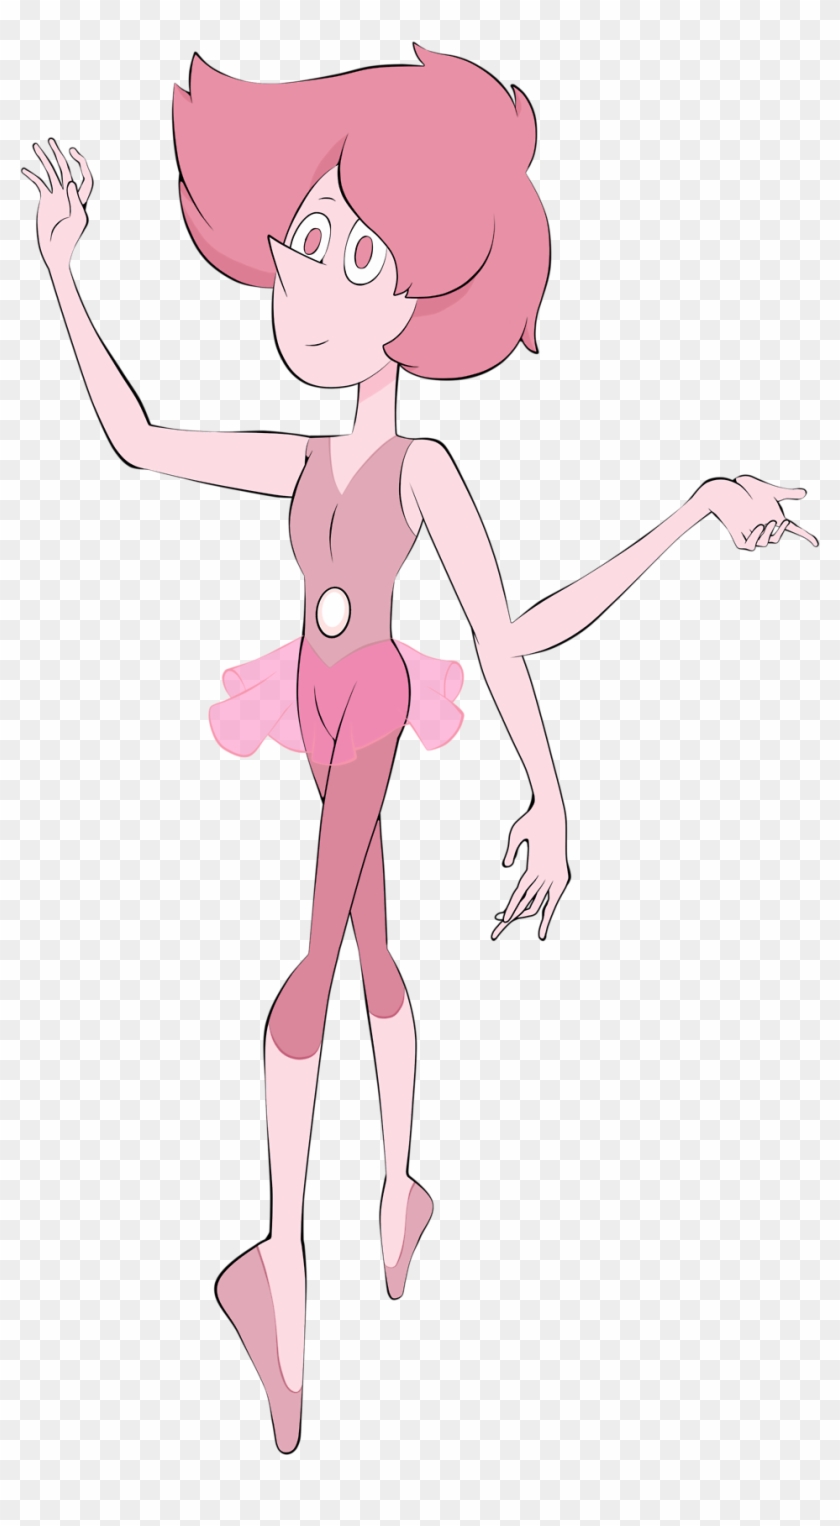 The Crystal Trio Steven Universe Pink Pearl Pearl Off - Steven Universe #323947